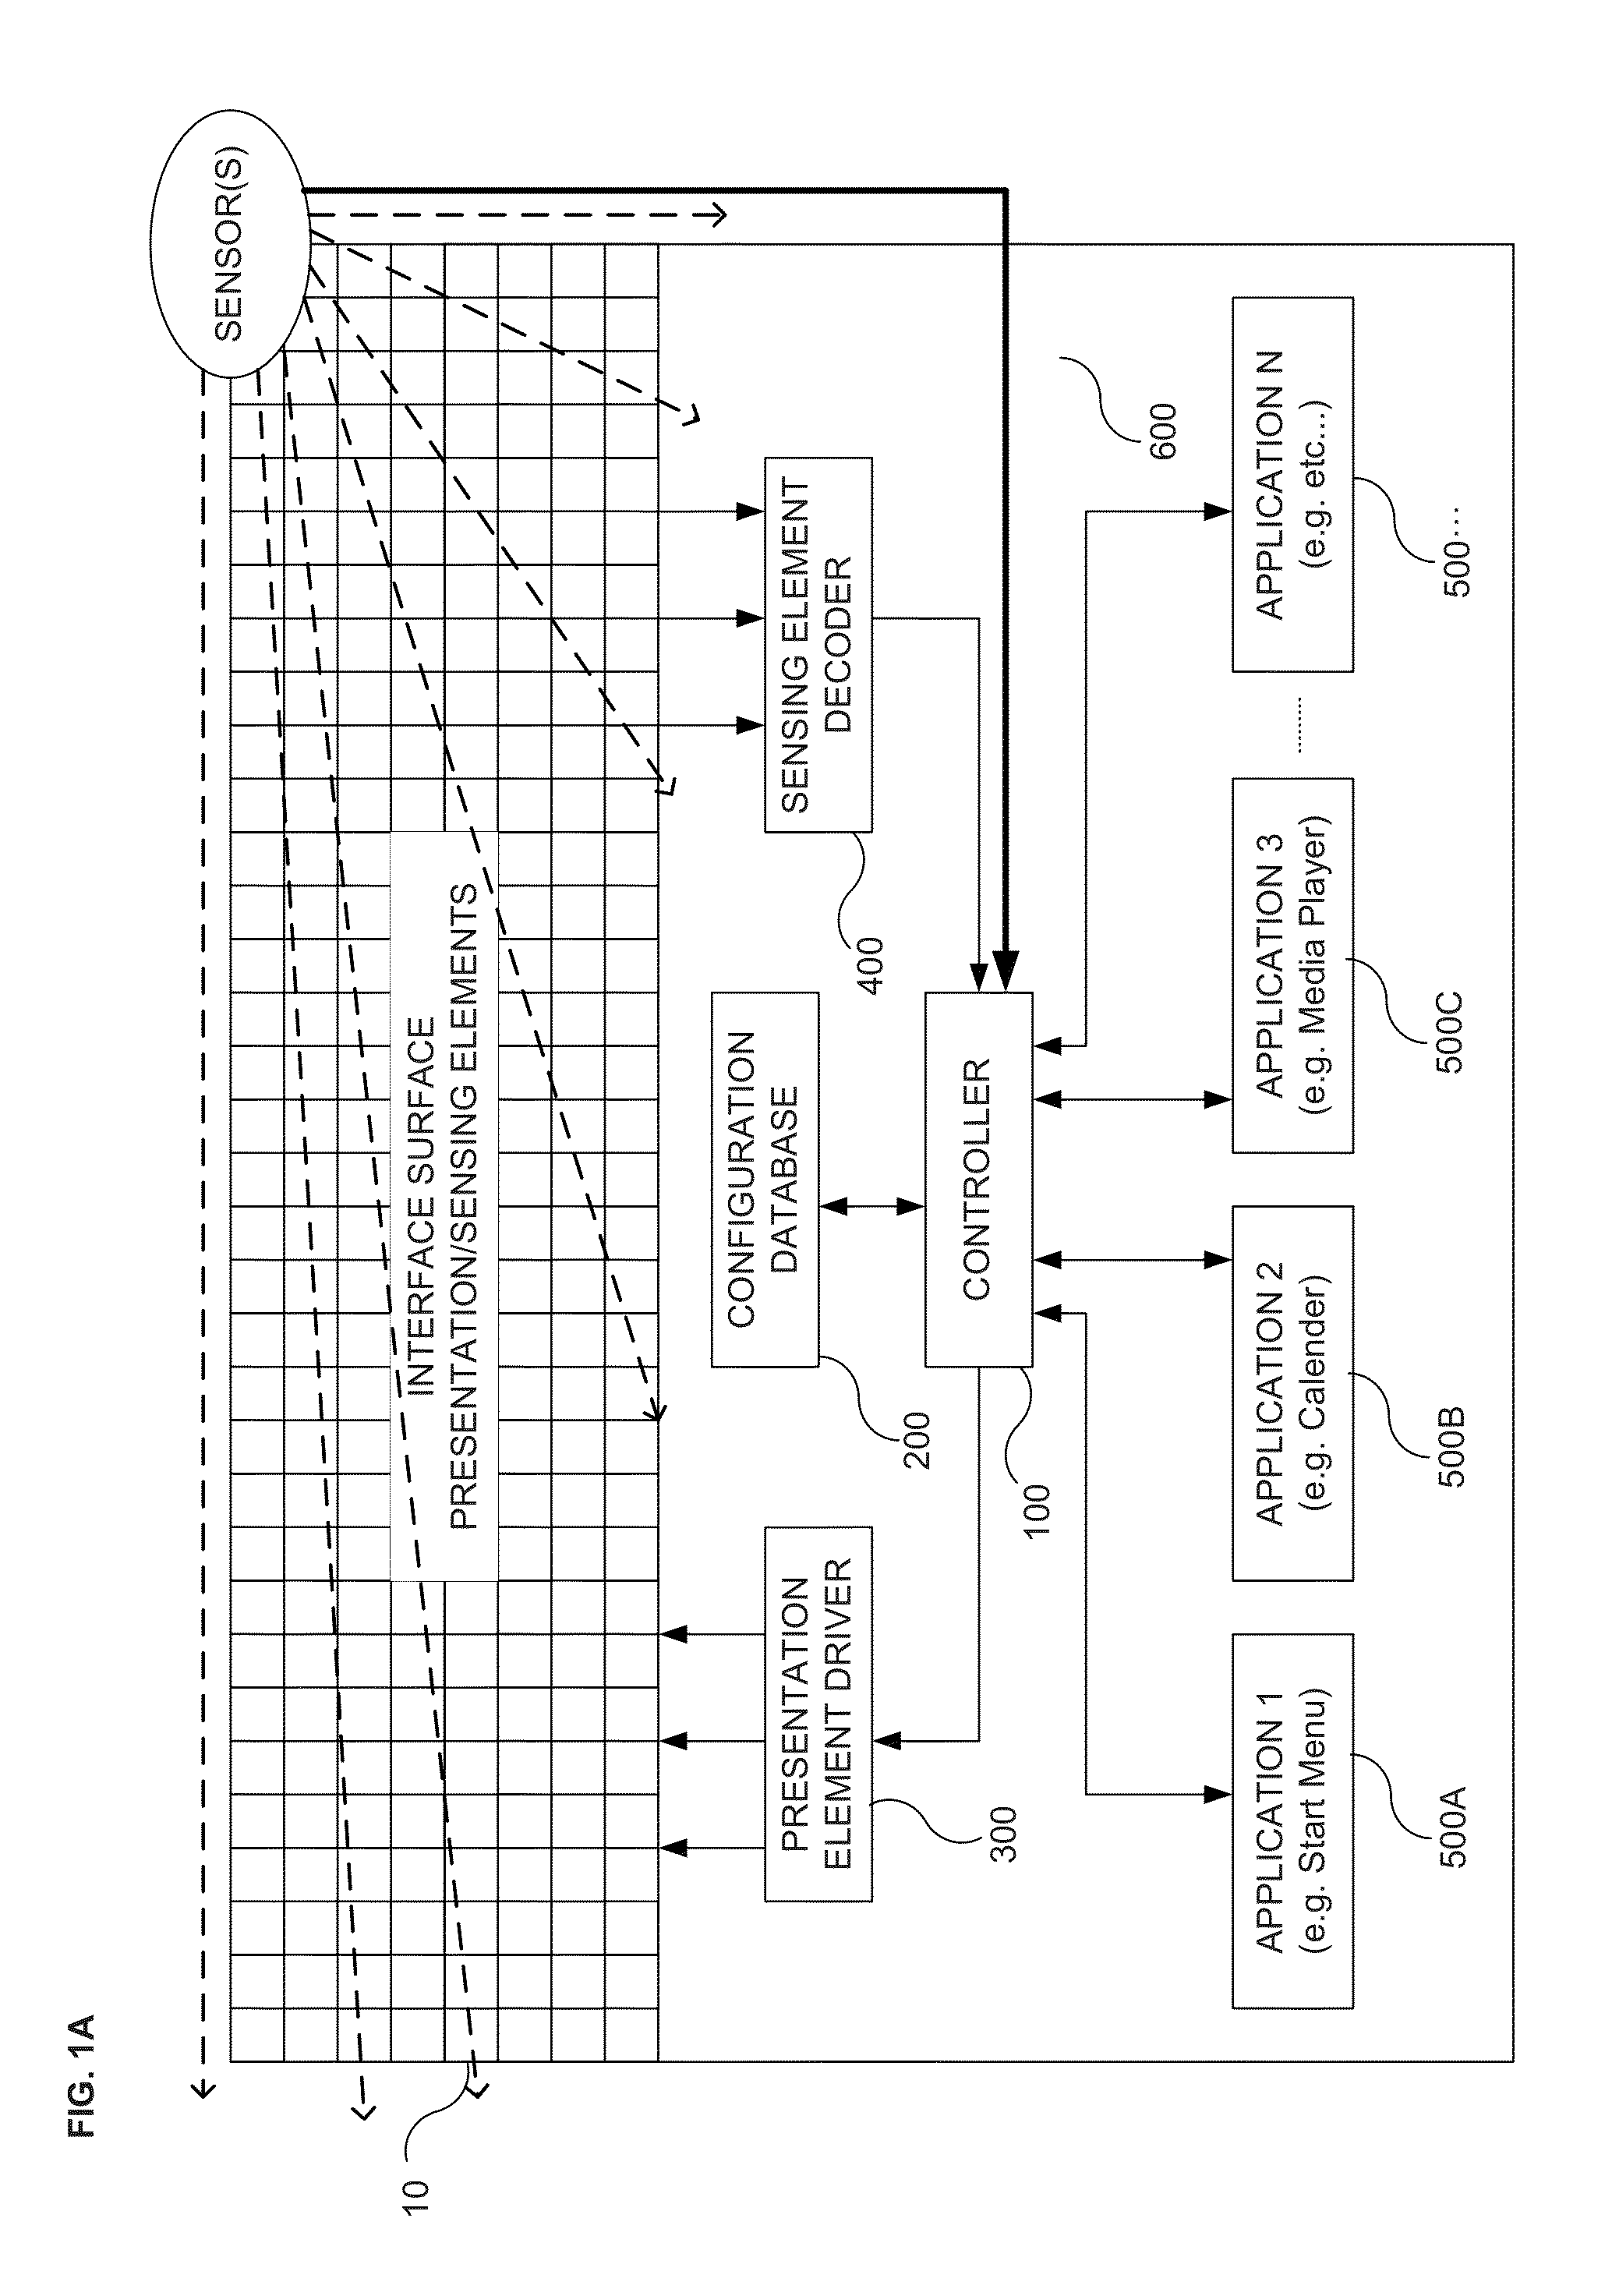 Methods, Systems, Apparatuses, Circuits and Associated Computer Executable Code for Detecting Motion, Position and/or Orientation of Objects Within a Defined Spatial Region